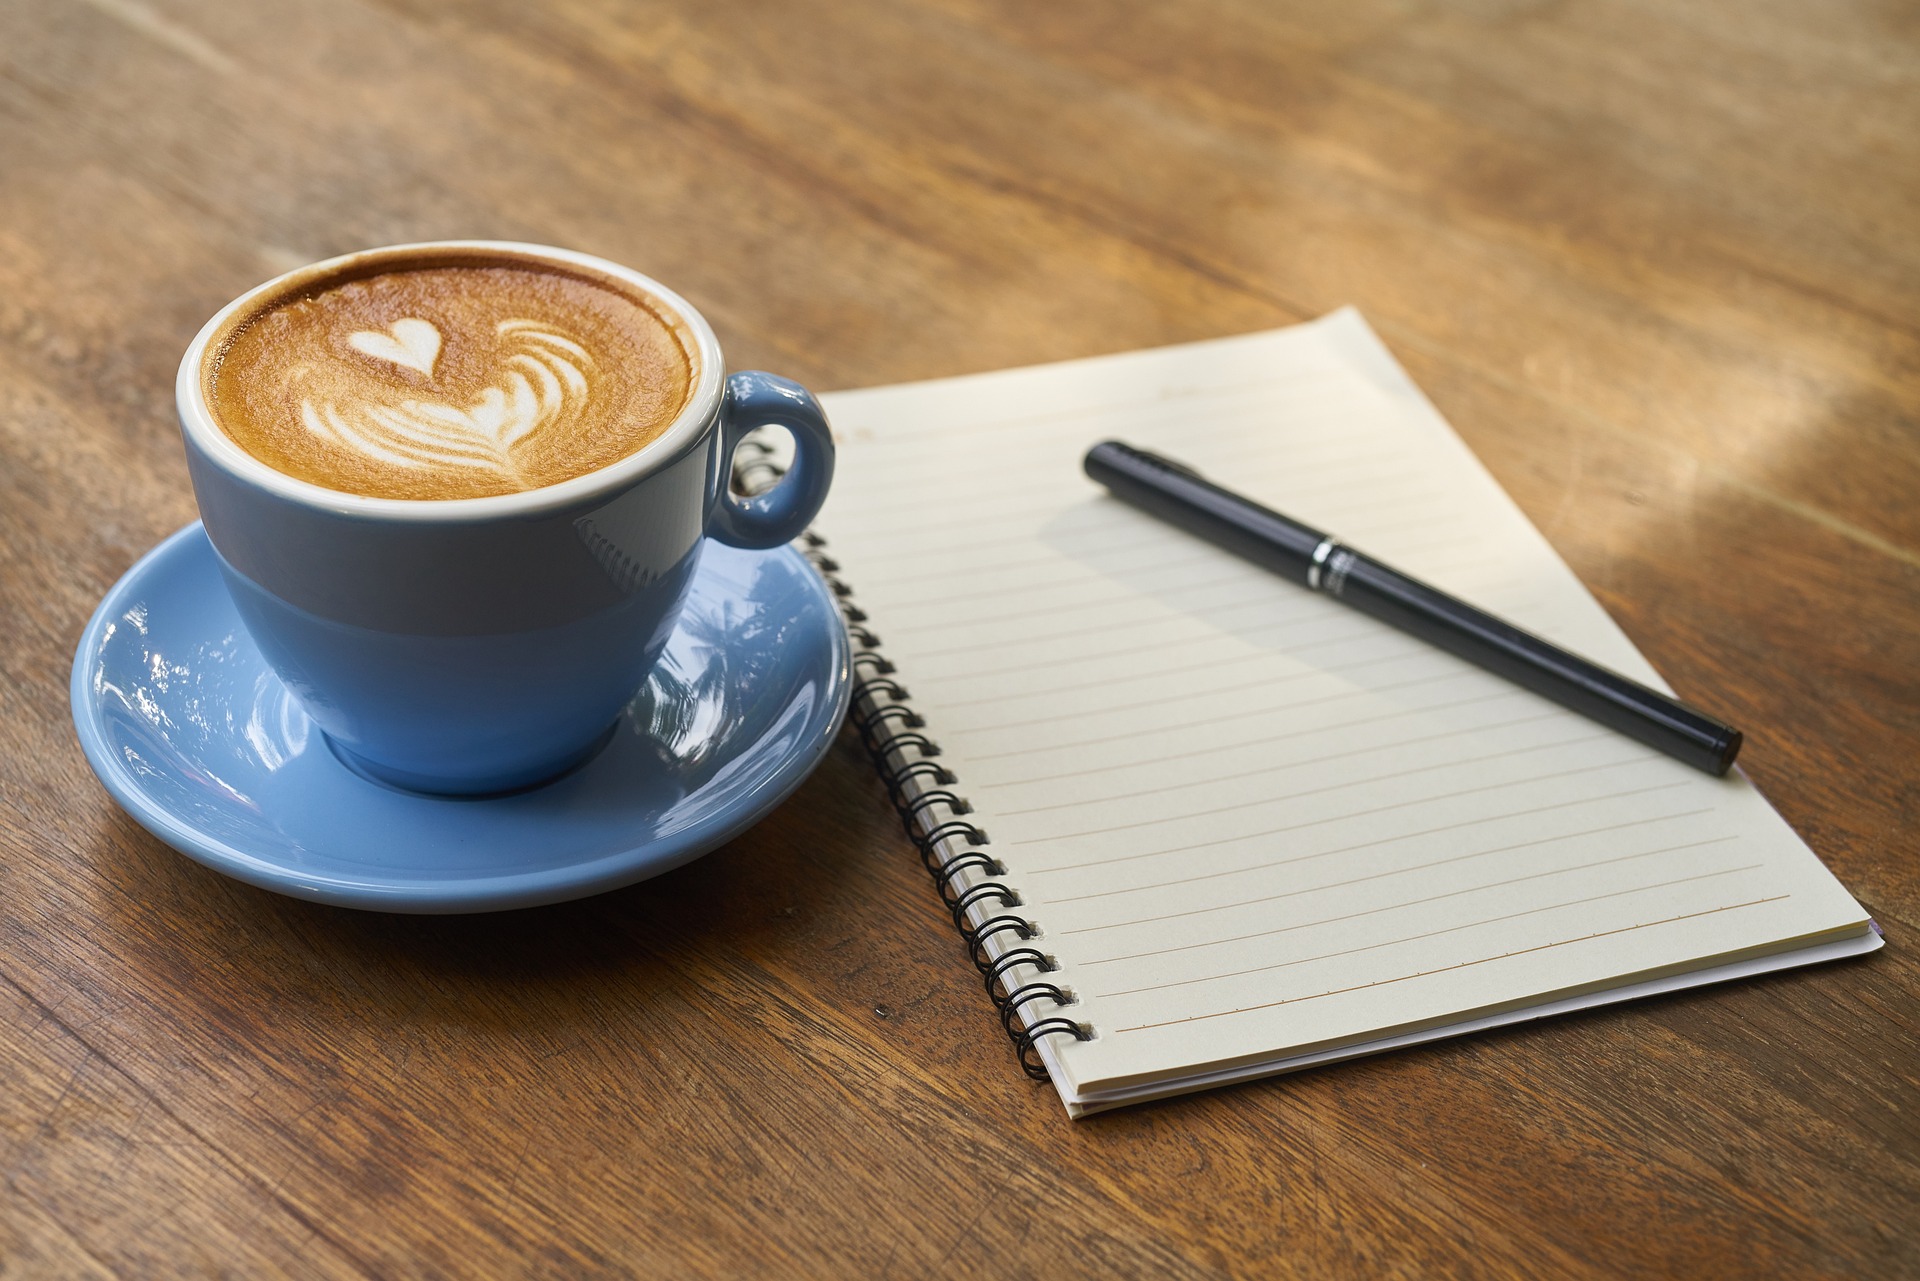 A cup of coffee resting next to a notebook on top of a table